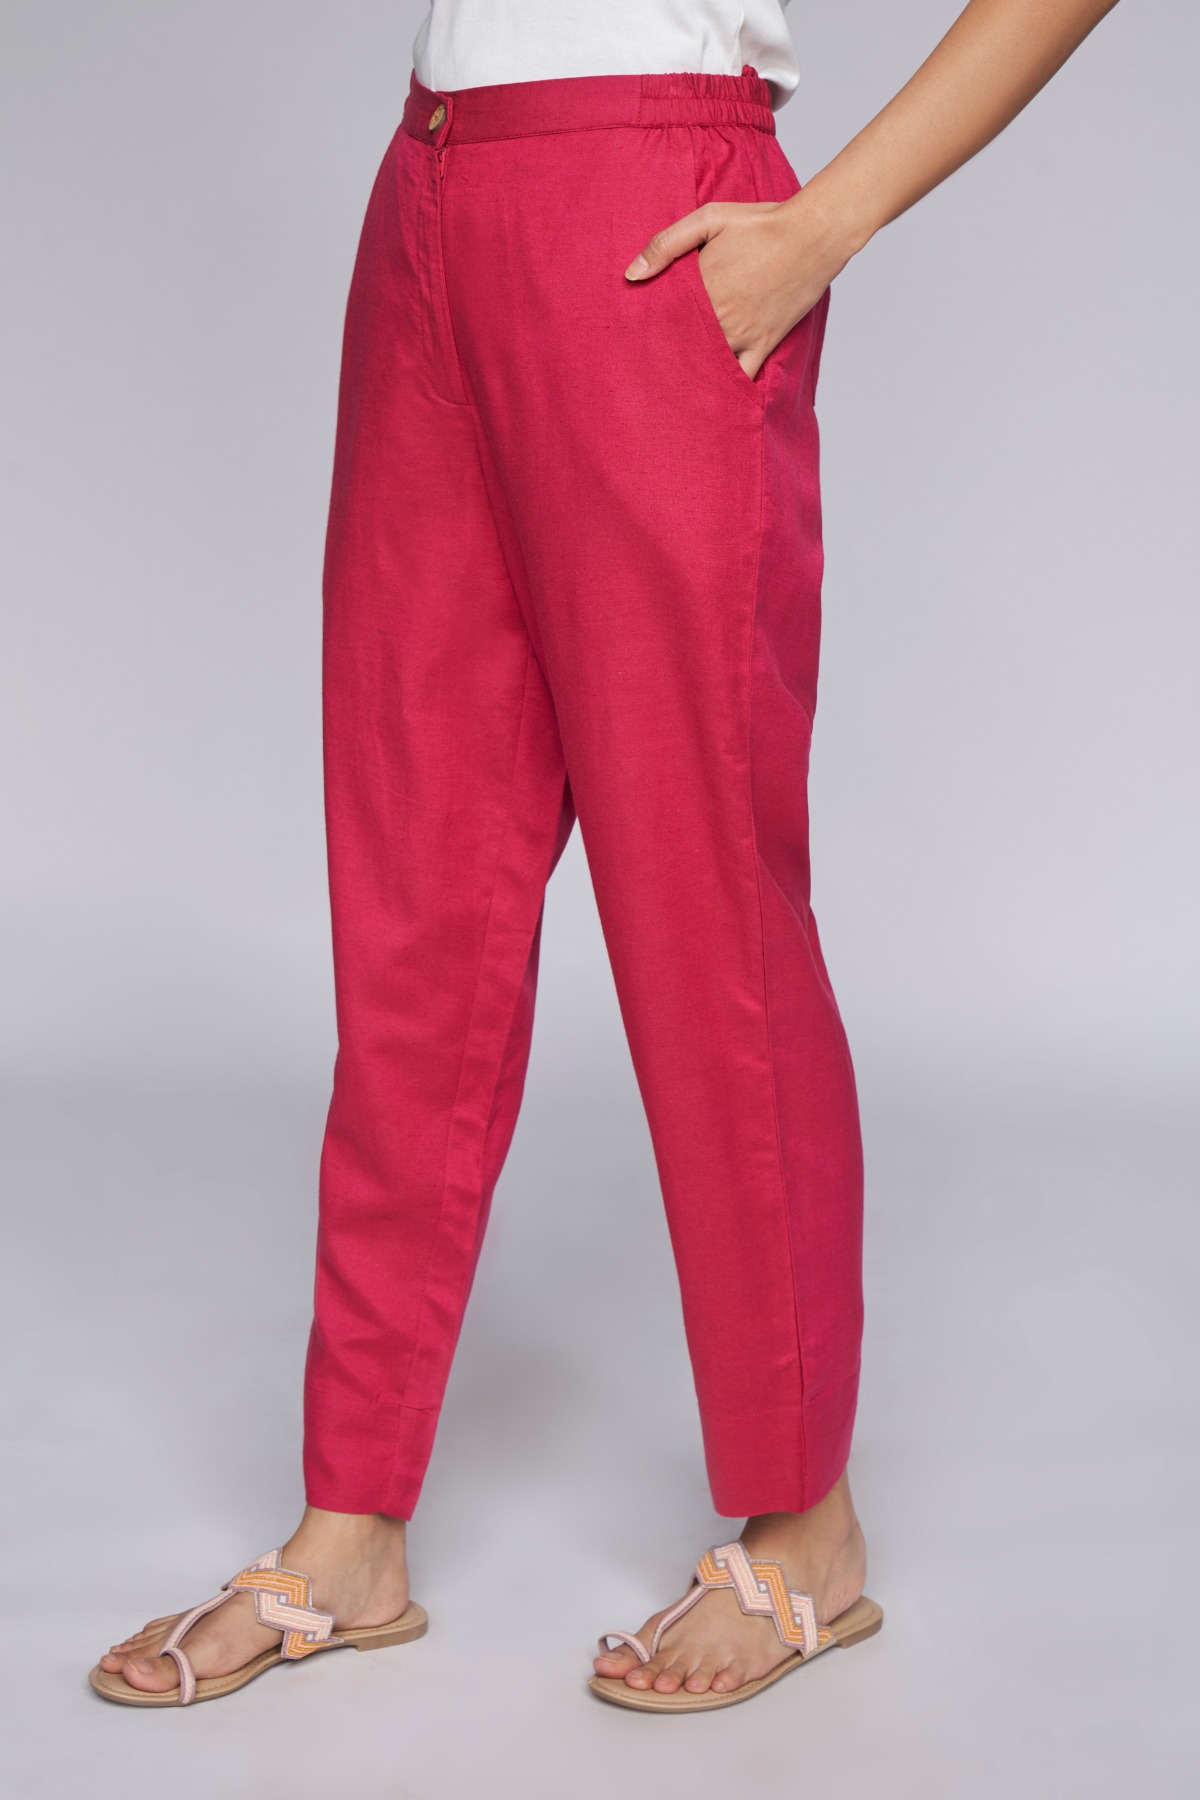 Buy Hot Pink Cargo Pants Party/ Casual Wear Cotton Online